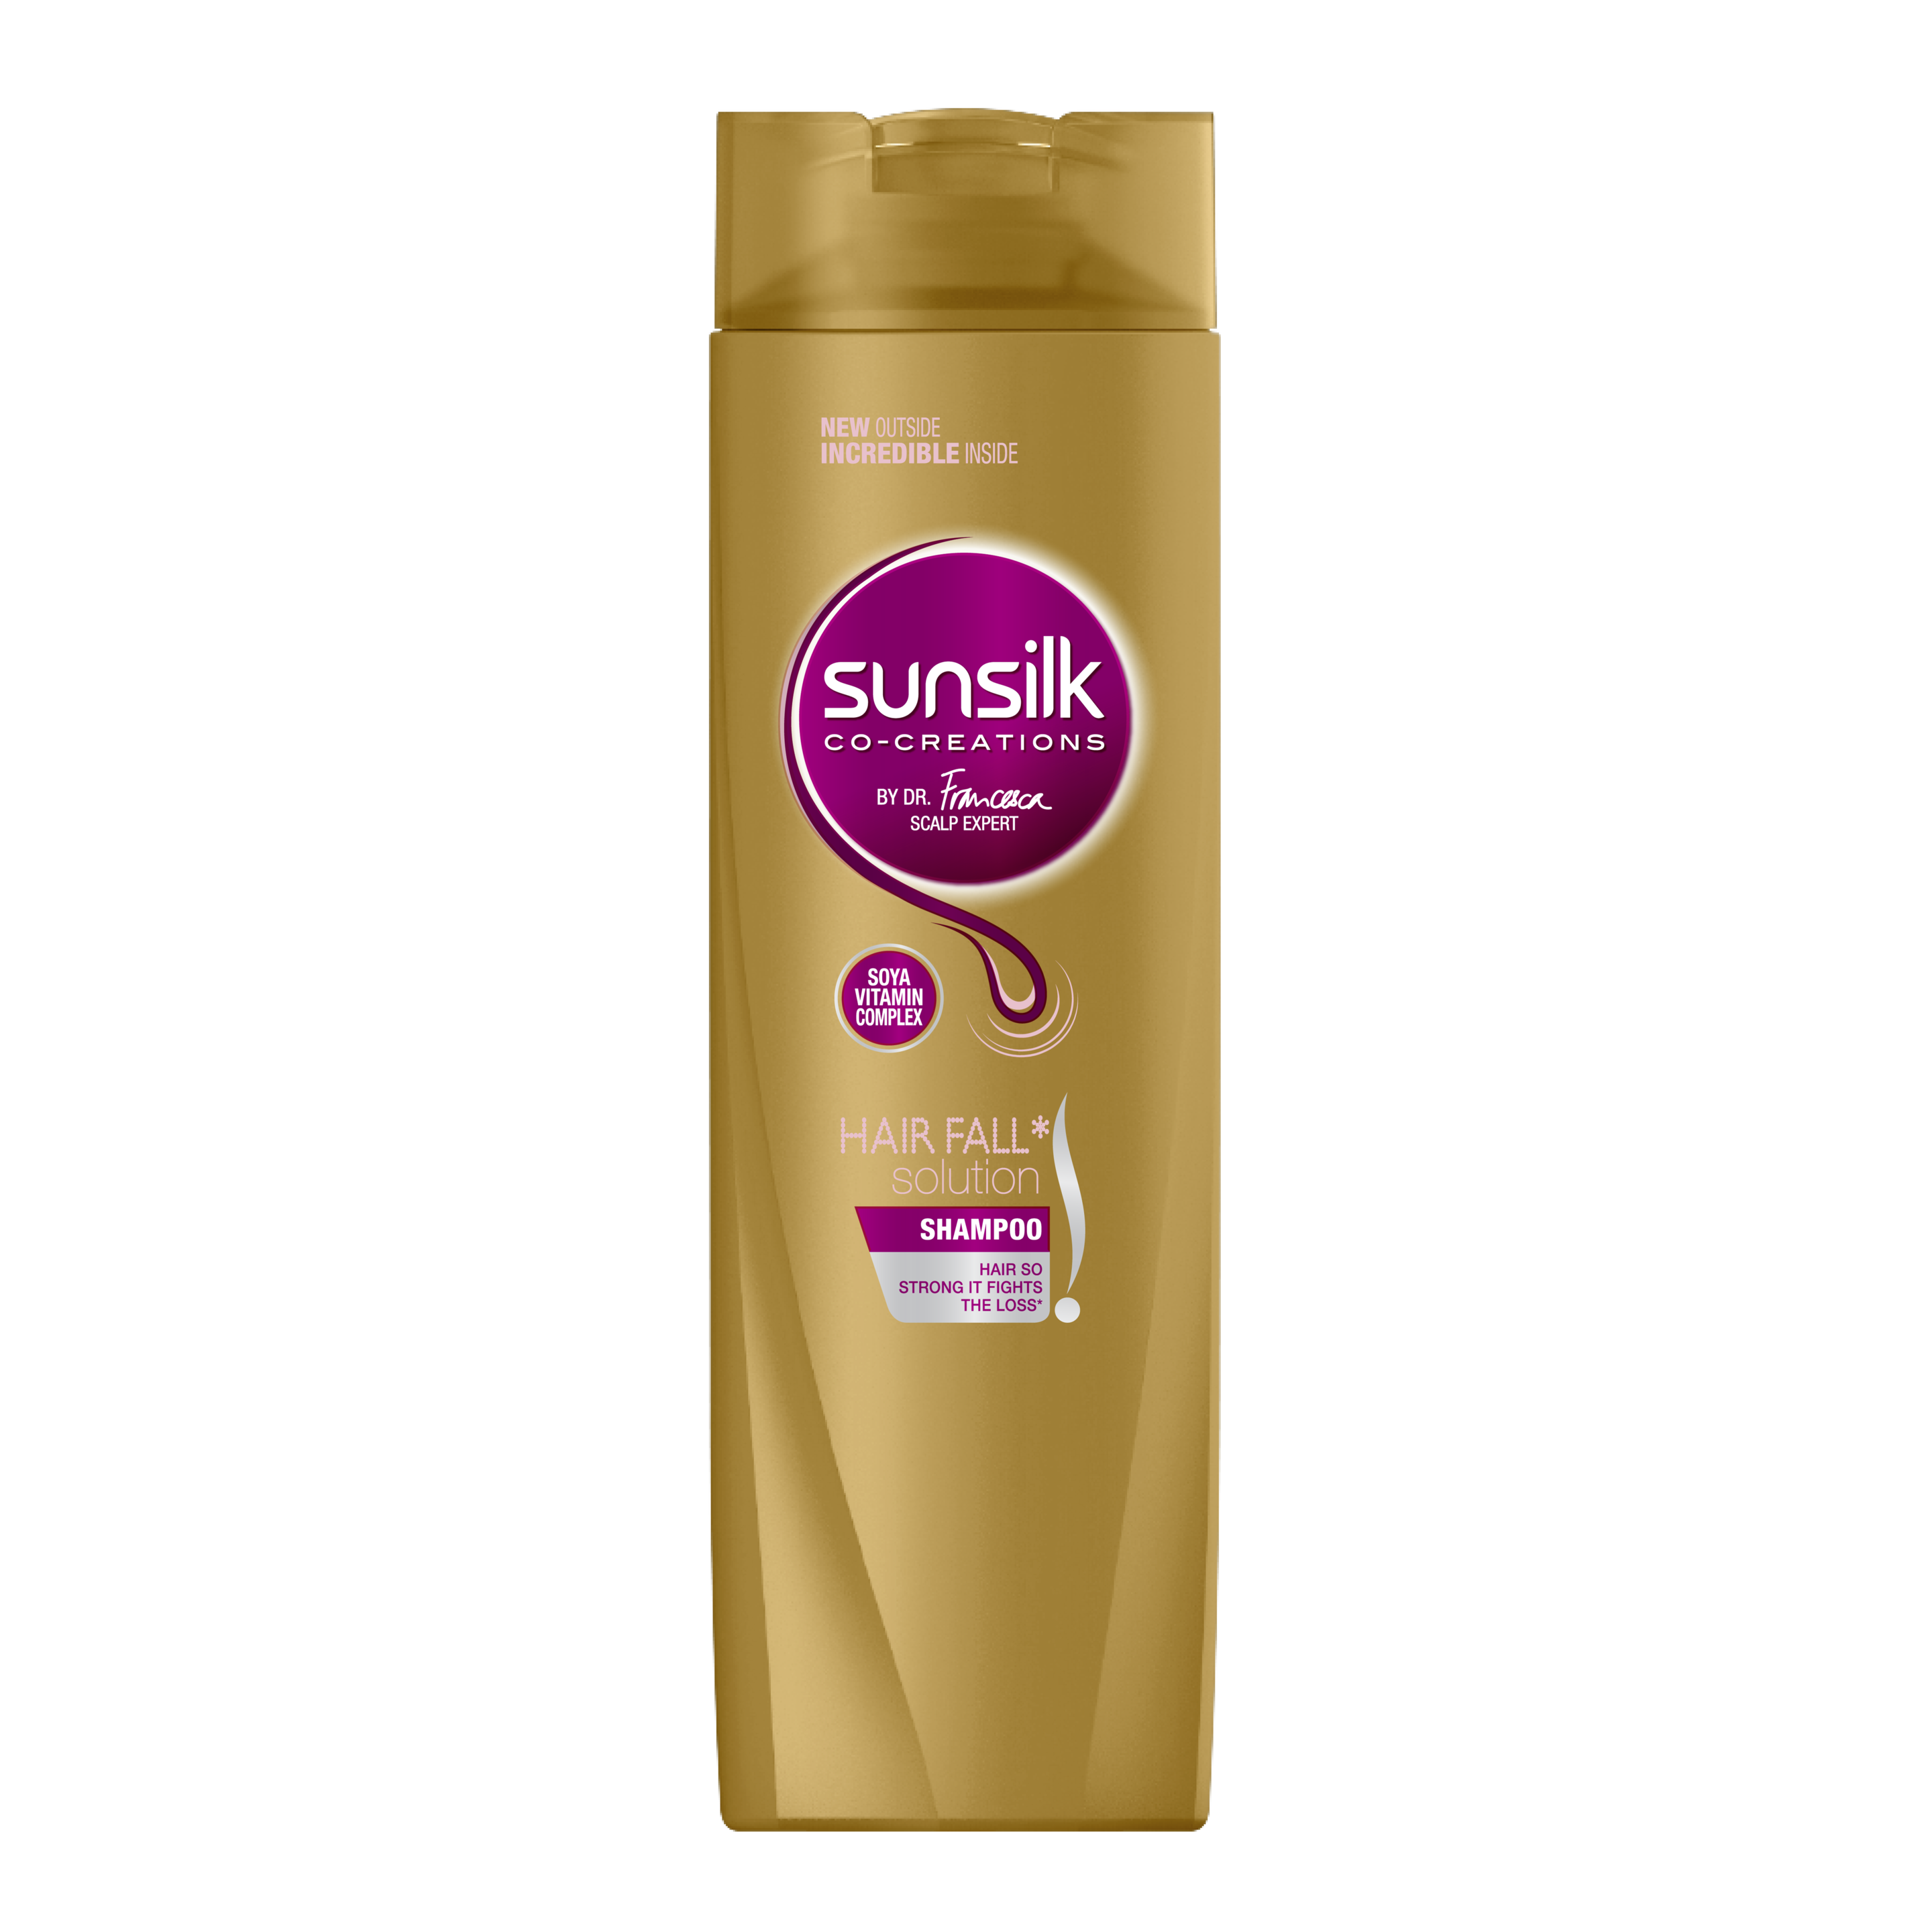 Sunsilk Hair Fall Solution Shampoo 160ml front of pack image